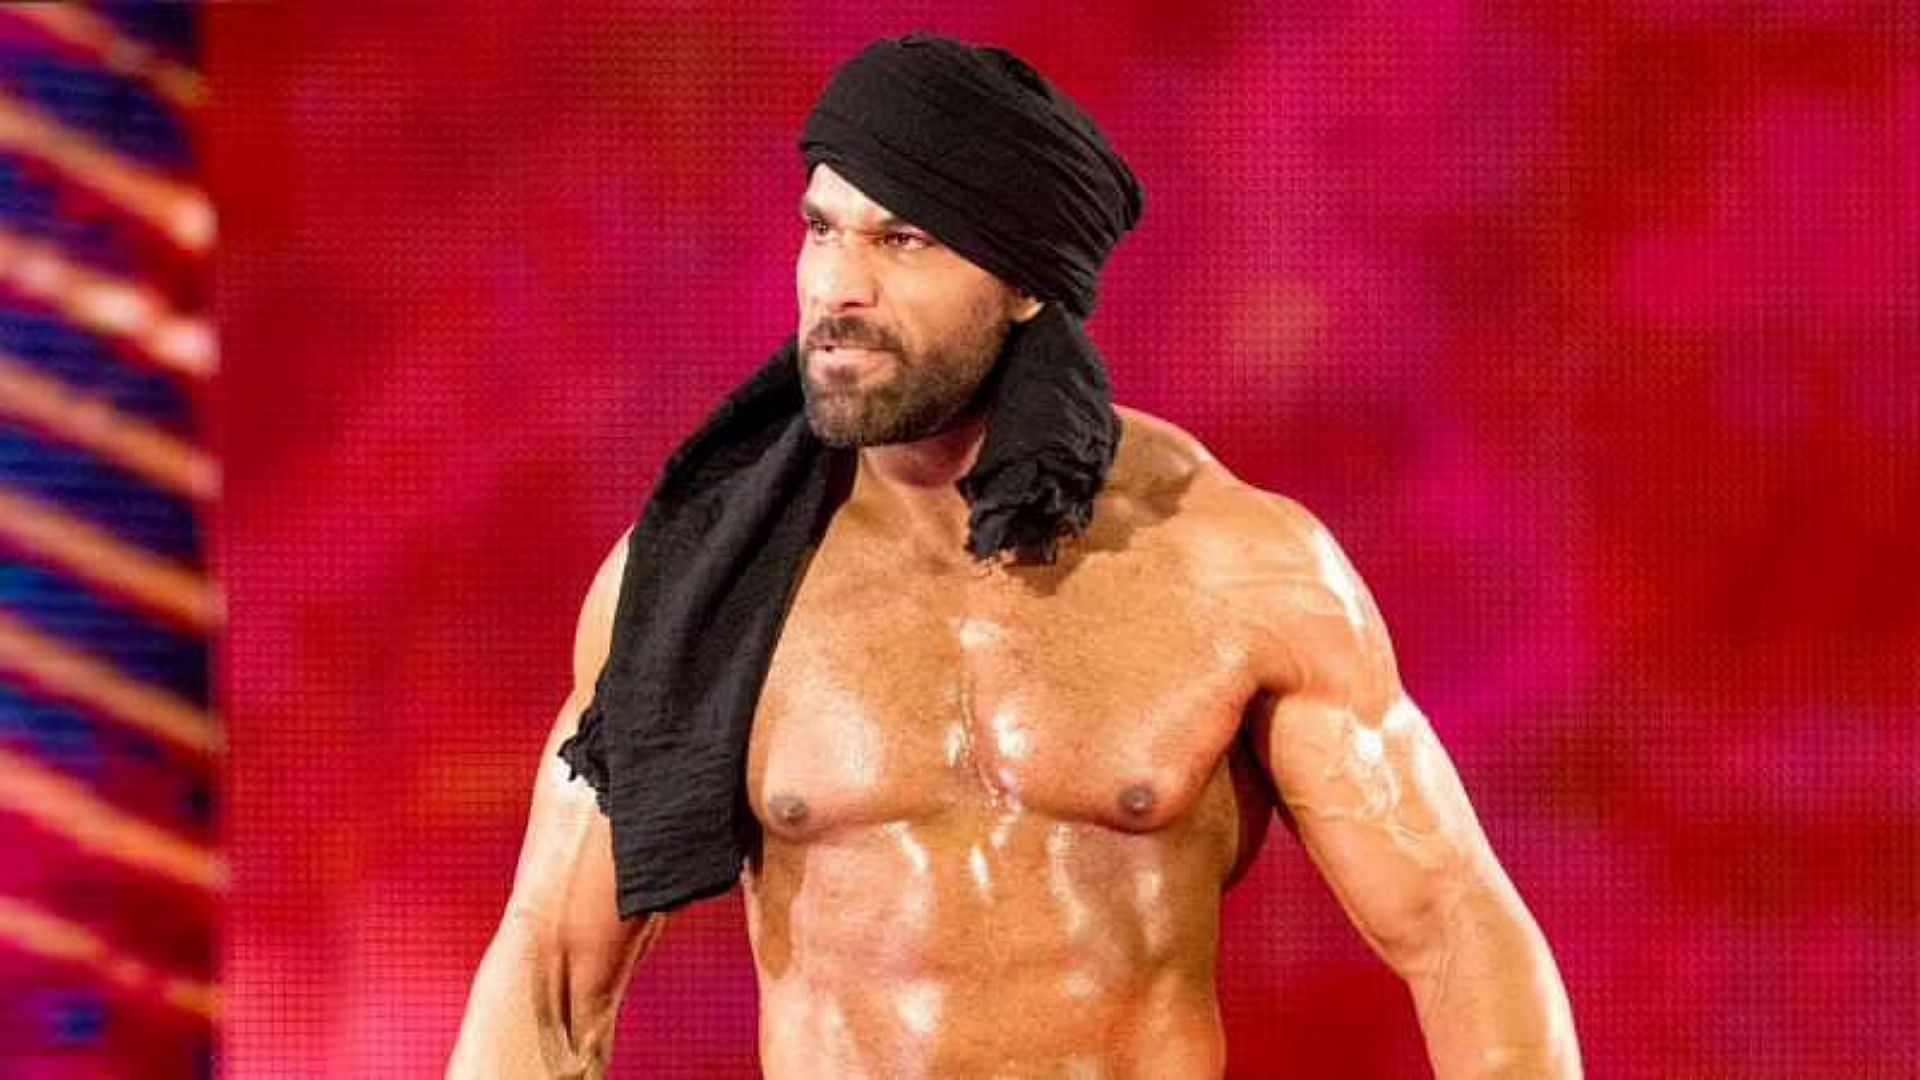 Jinder is the nephew of the legendary Gama Singh